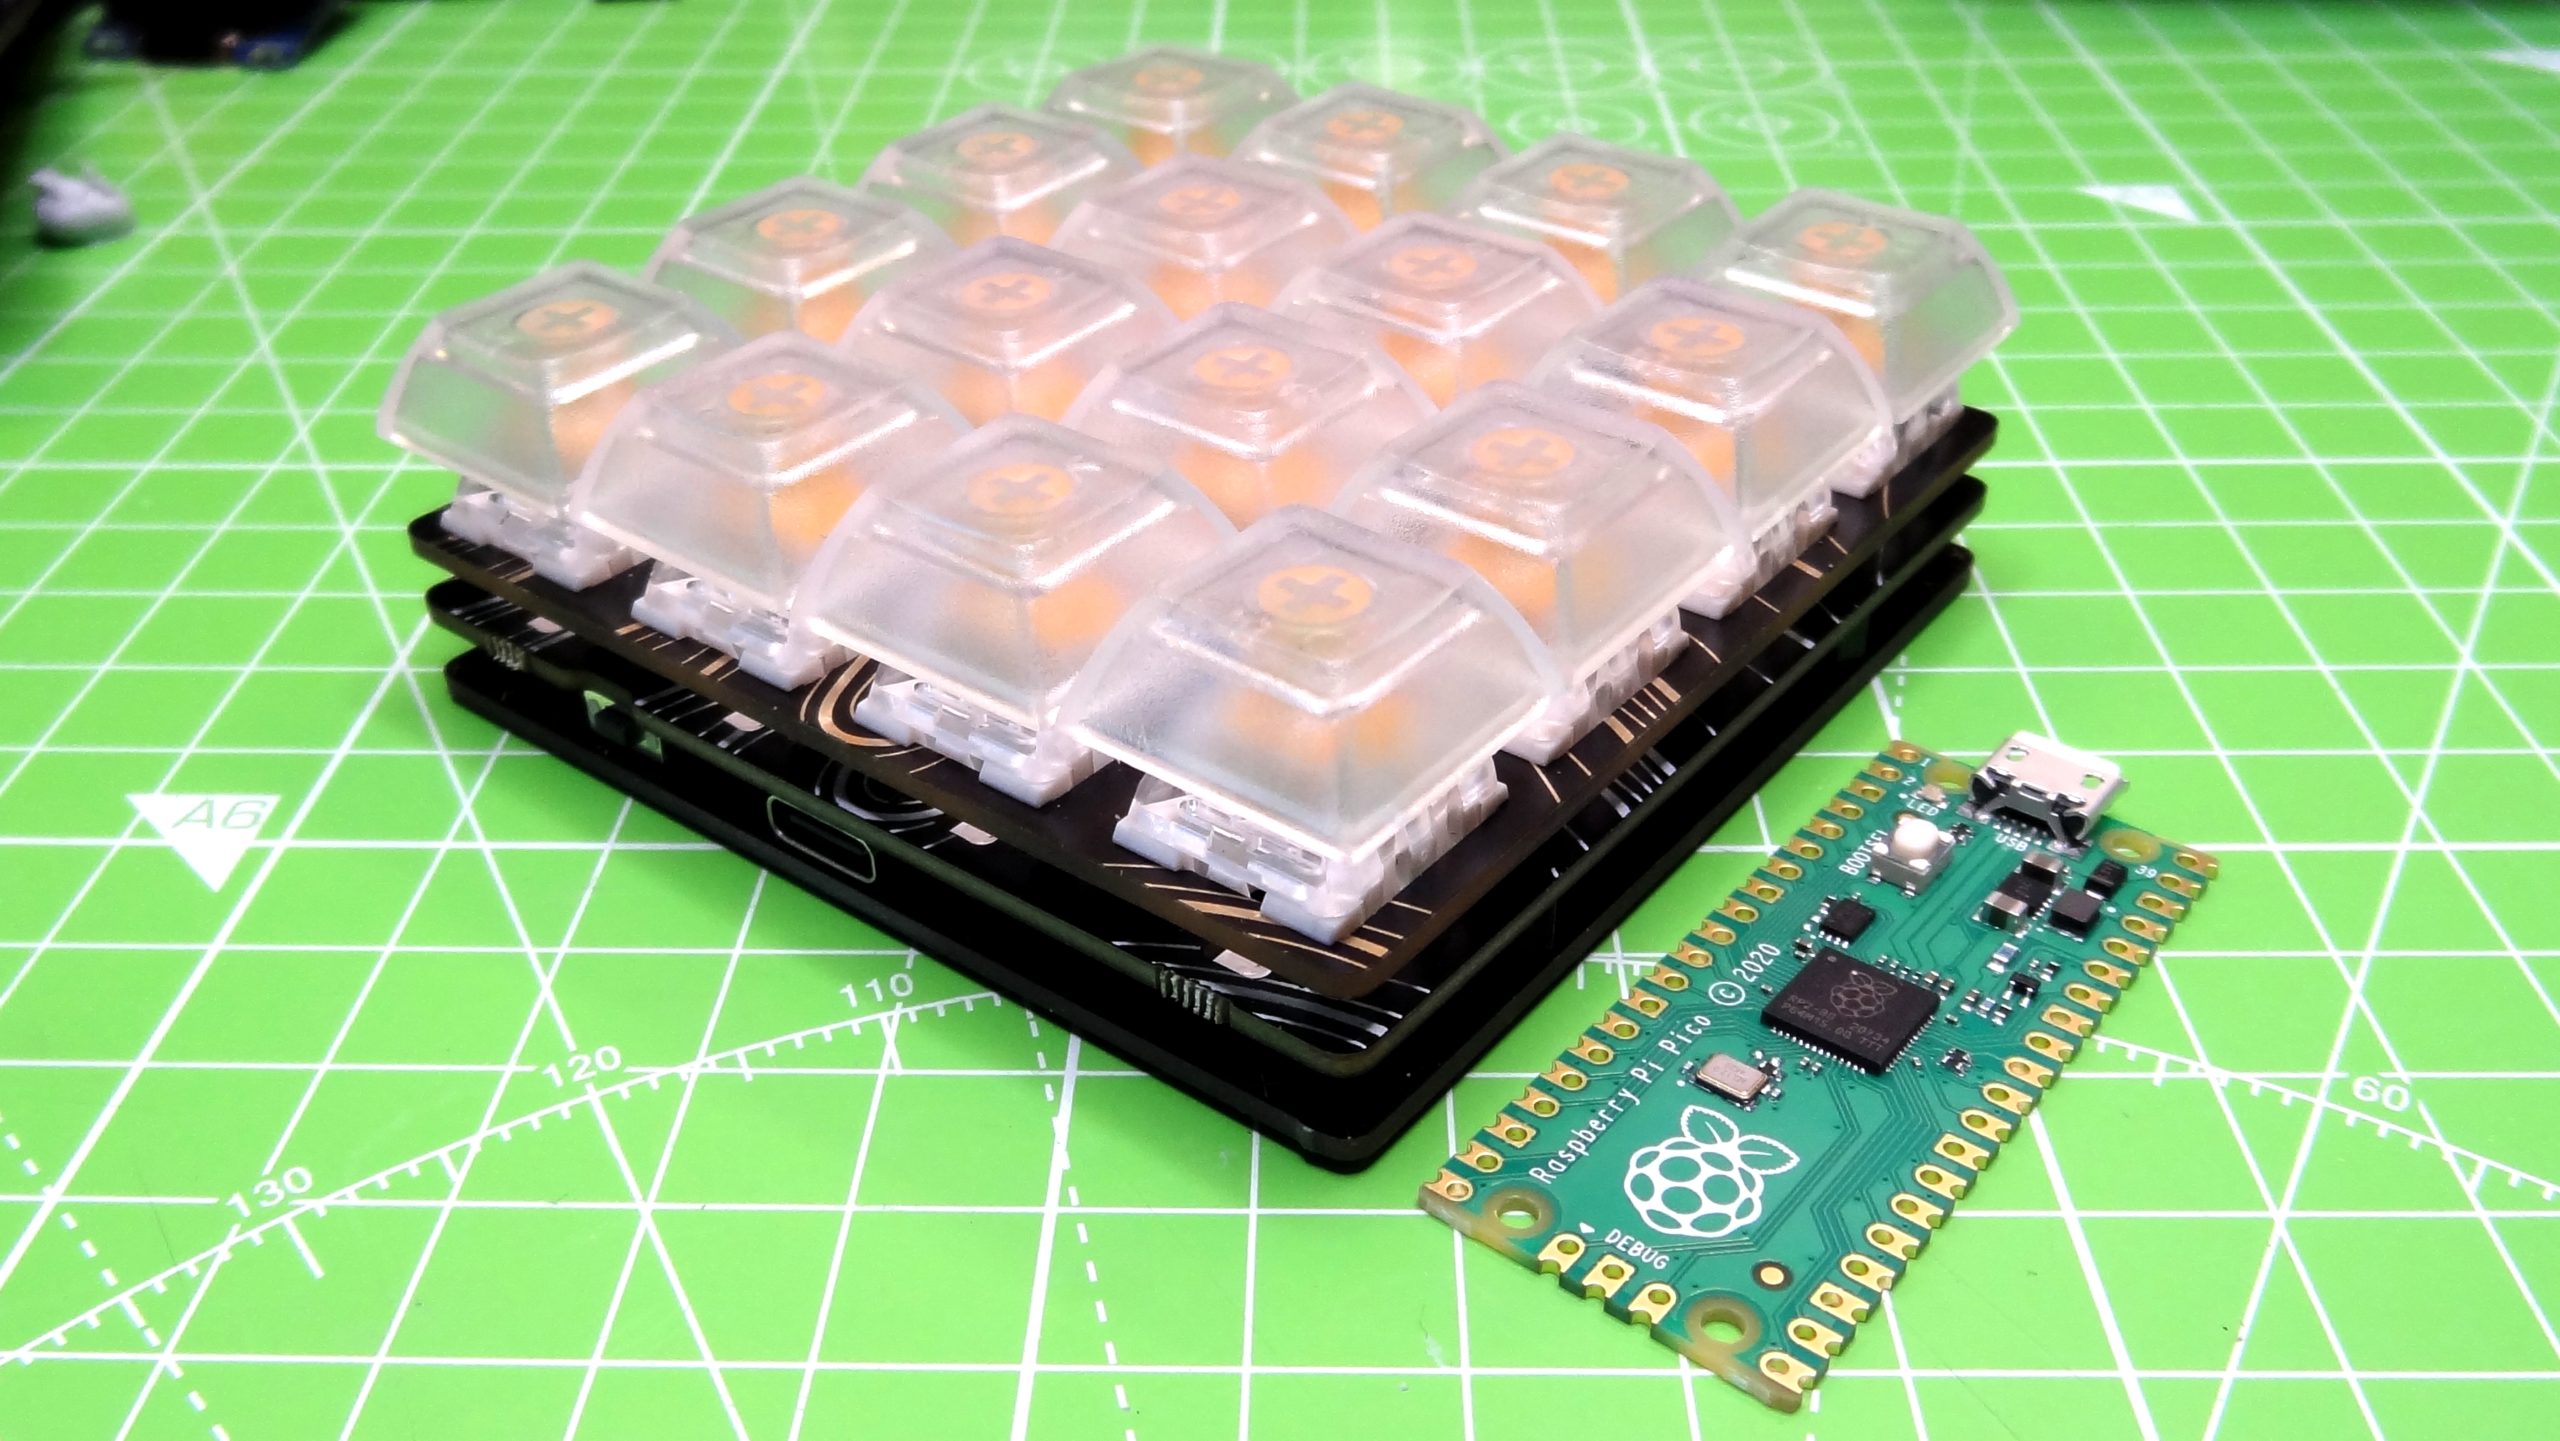 pimoroni-keybow-2040-review:-programmable-keyboard-with-pi-silicon-inside